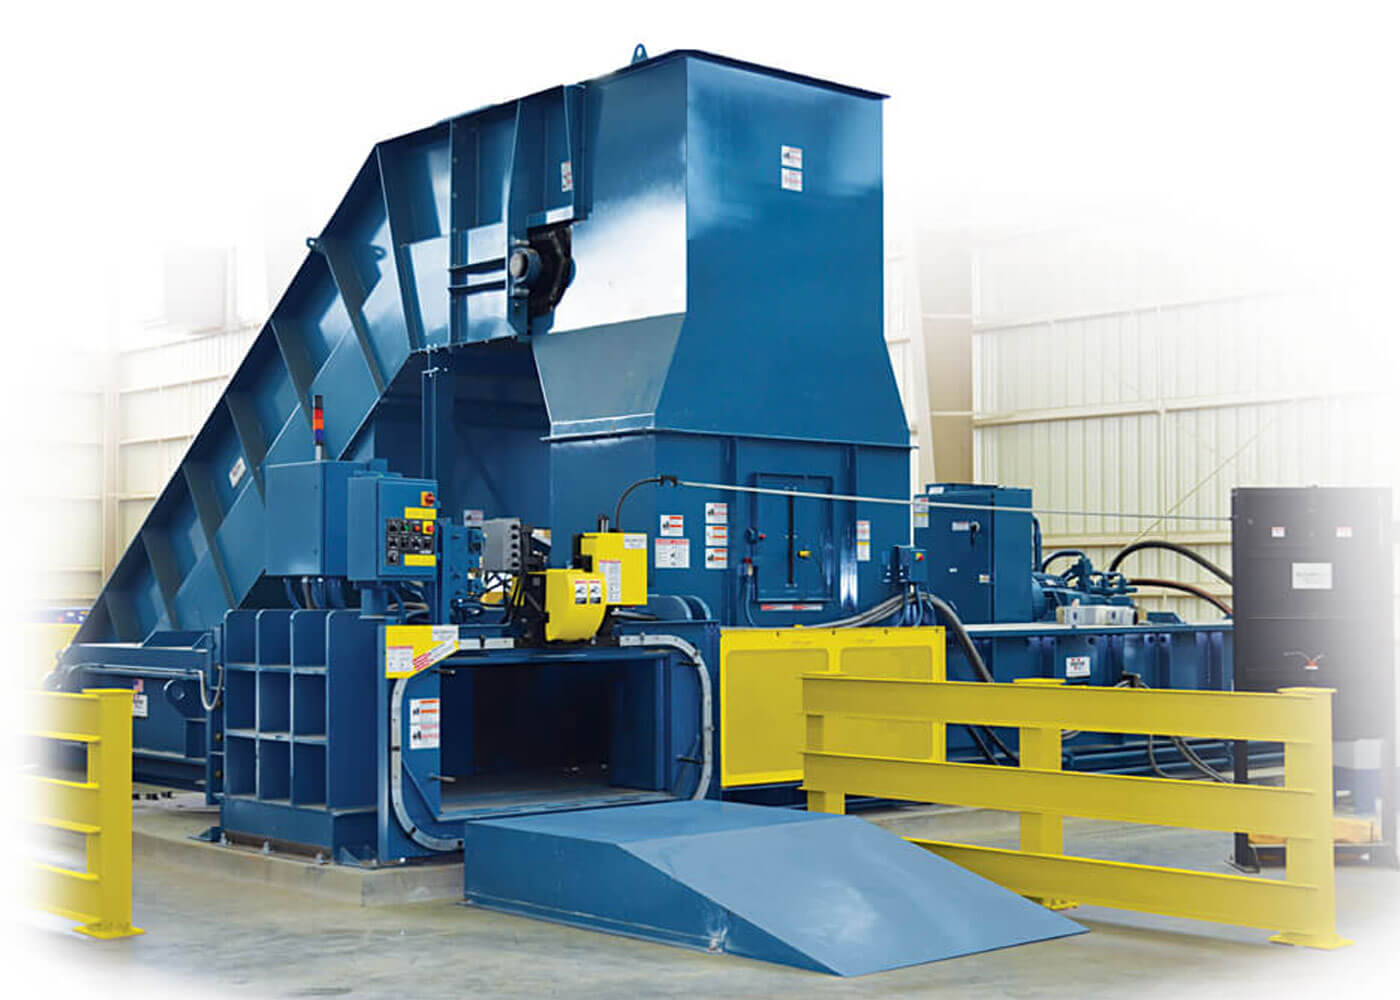 Galaxy 2 two ram recycling baler with narrow door model for recycling centers